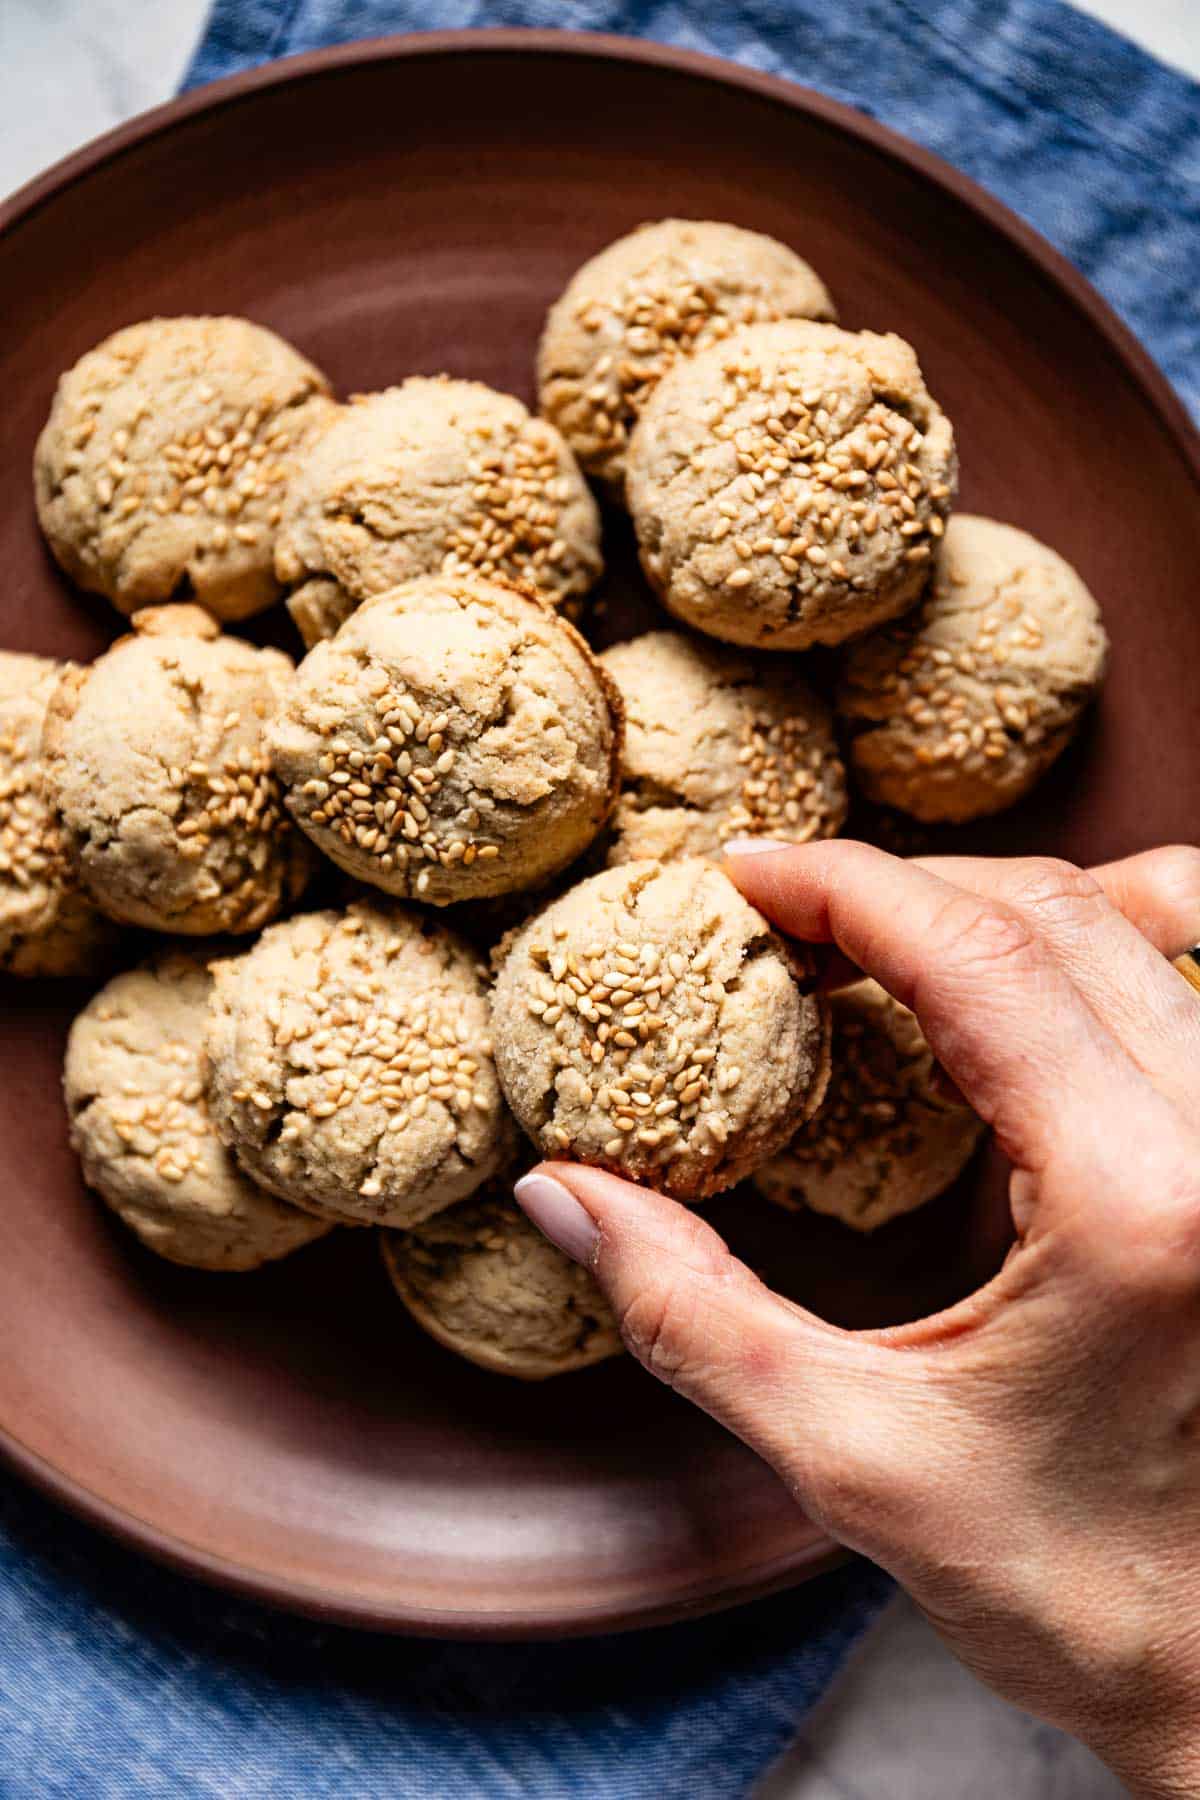 Almond flour tahini cookies on a plate from the top view with a person taking one from the plate.